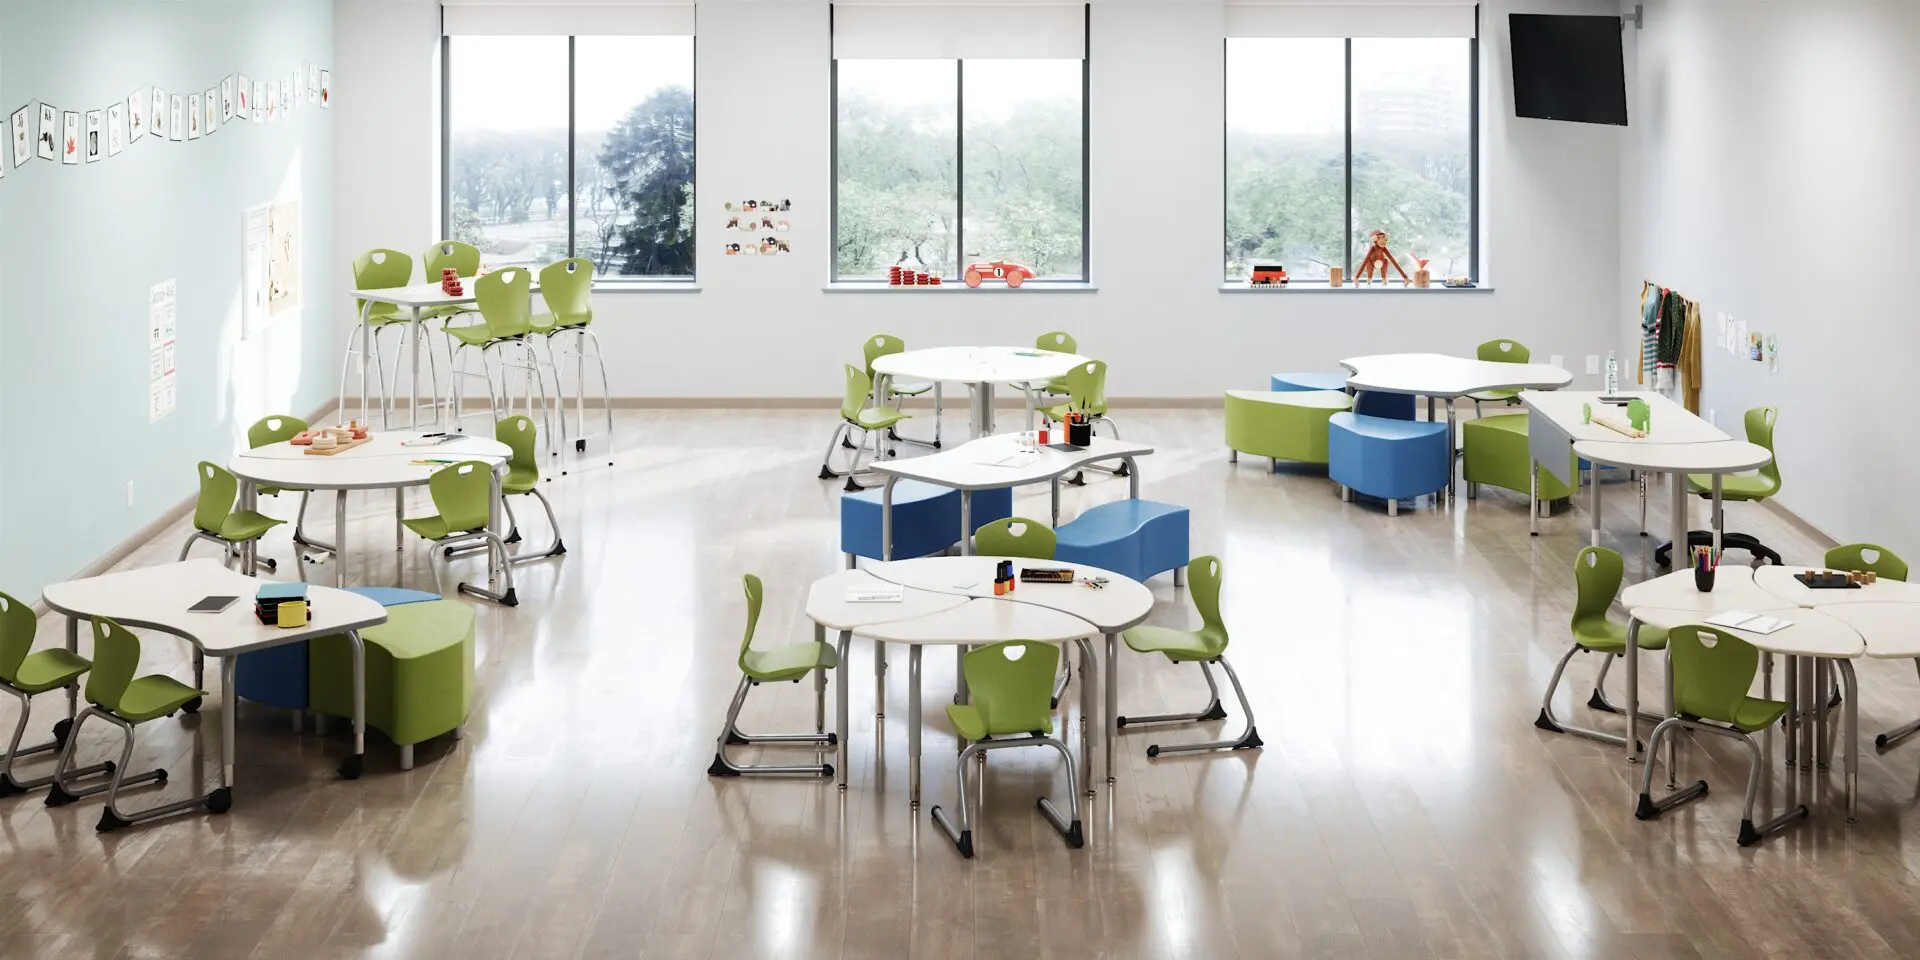 A classroom with tables and chairs in it